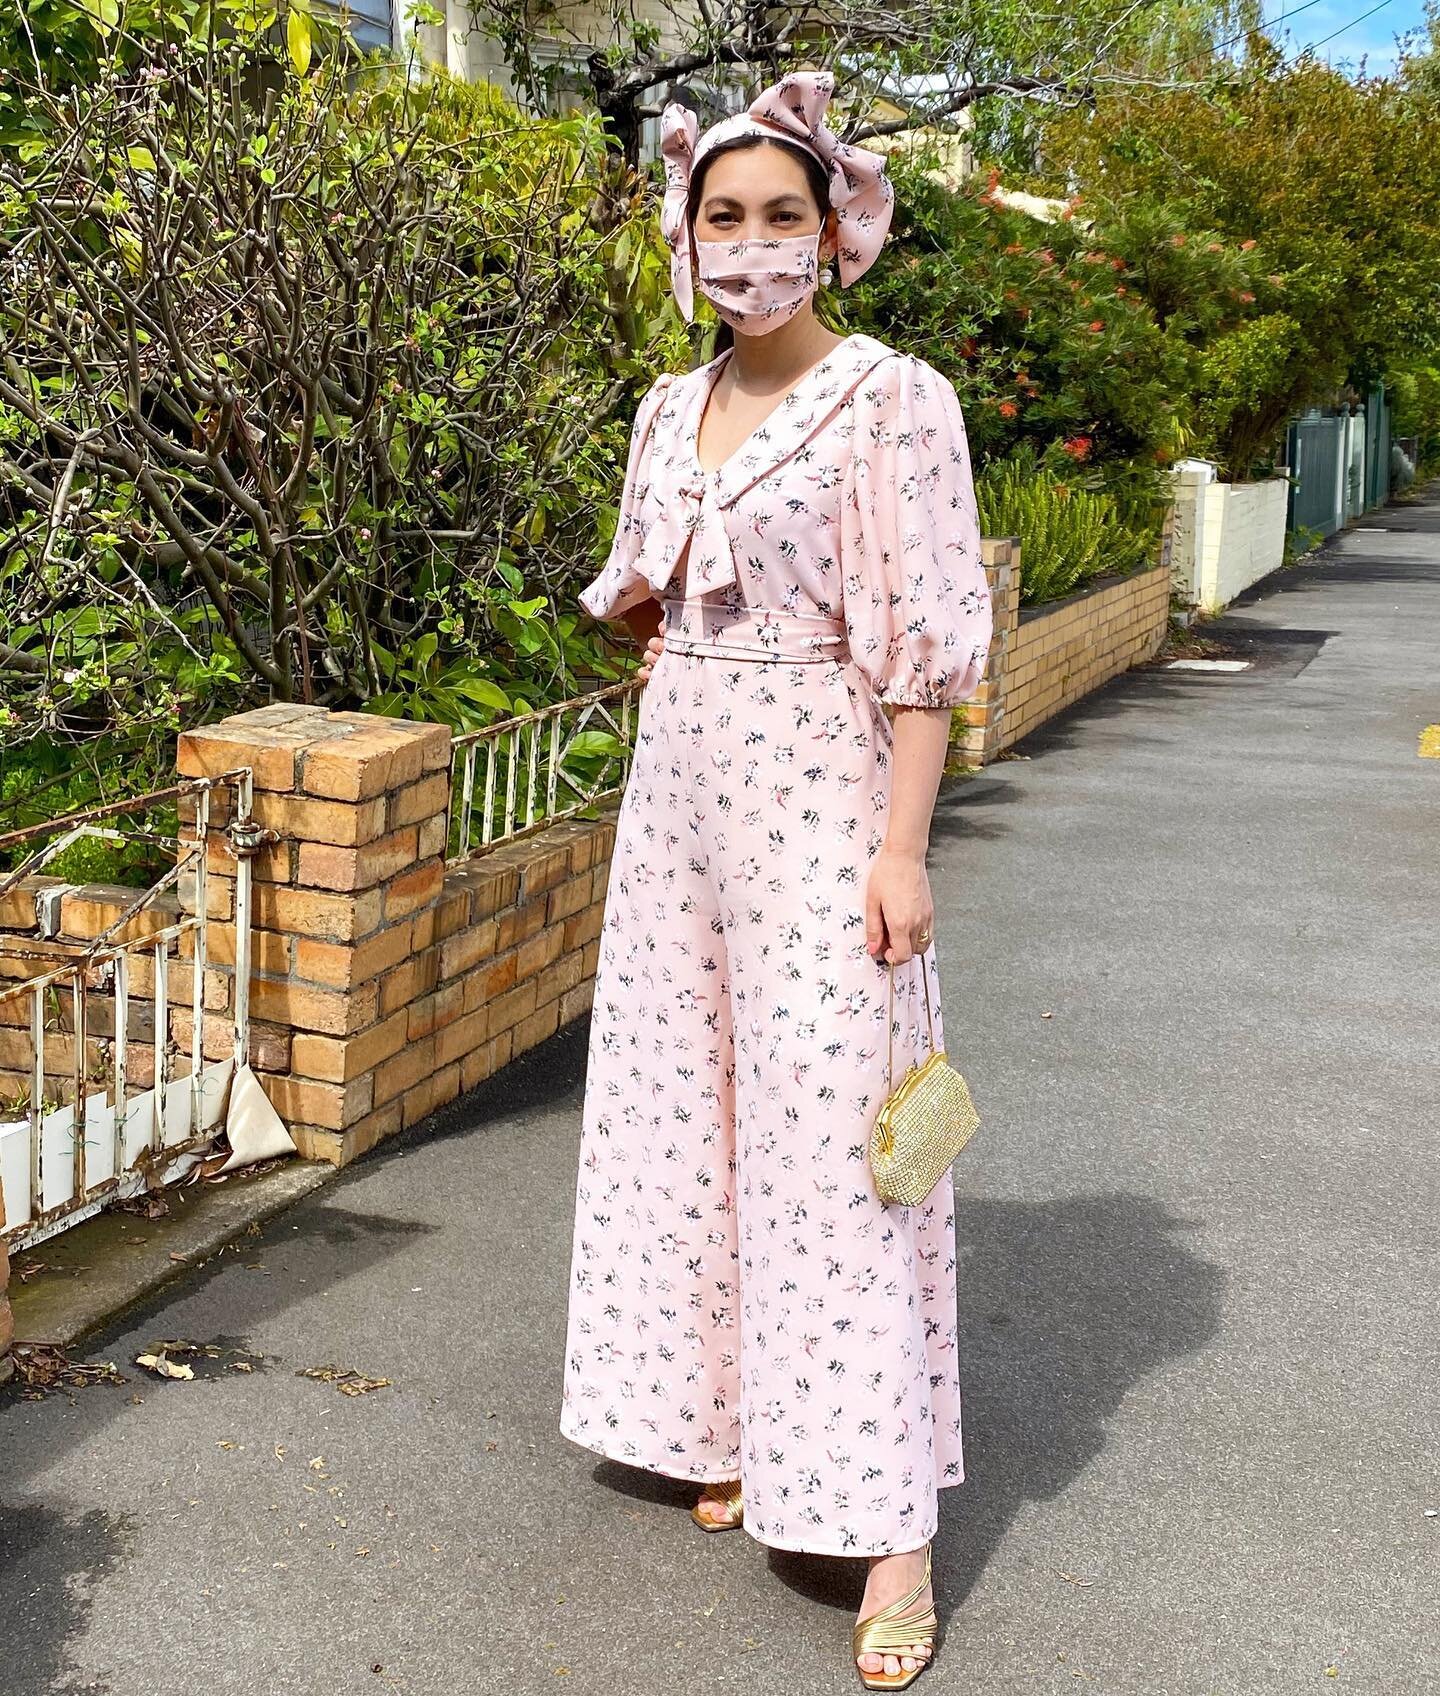 Spring carnival is underway with my attention today on Caulfield for Underwood Stakes Day 🏇and Rosehill Gardens for Golden Rose Day 🌹

Jumpsuit, headband and mask made by me 🧵✂️😷🎀

📷 @psikari